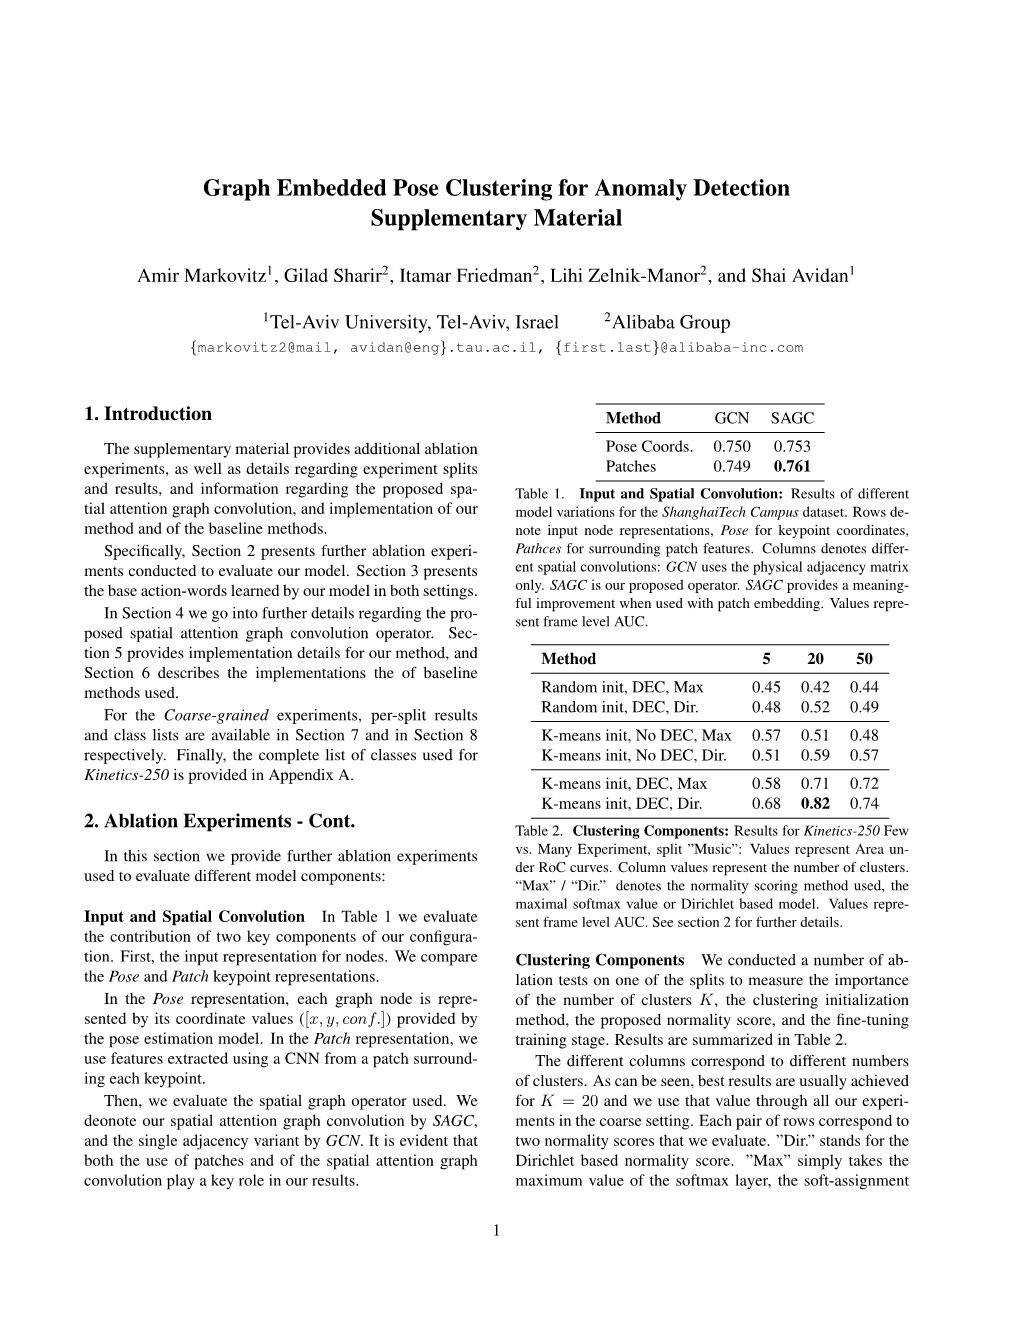 Graph Embedded Pose Clustering for Anomaly Detection Supplementary Material